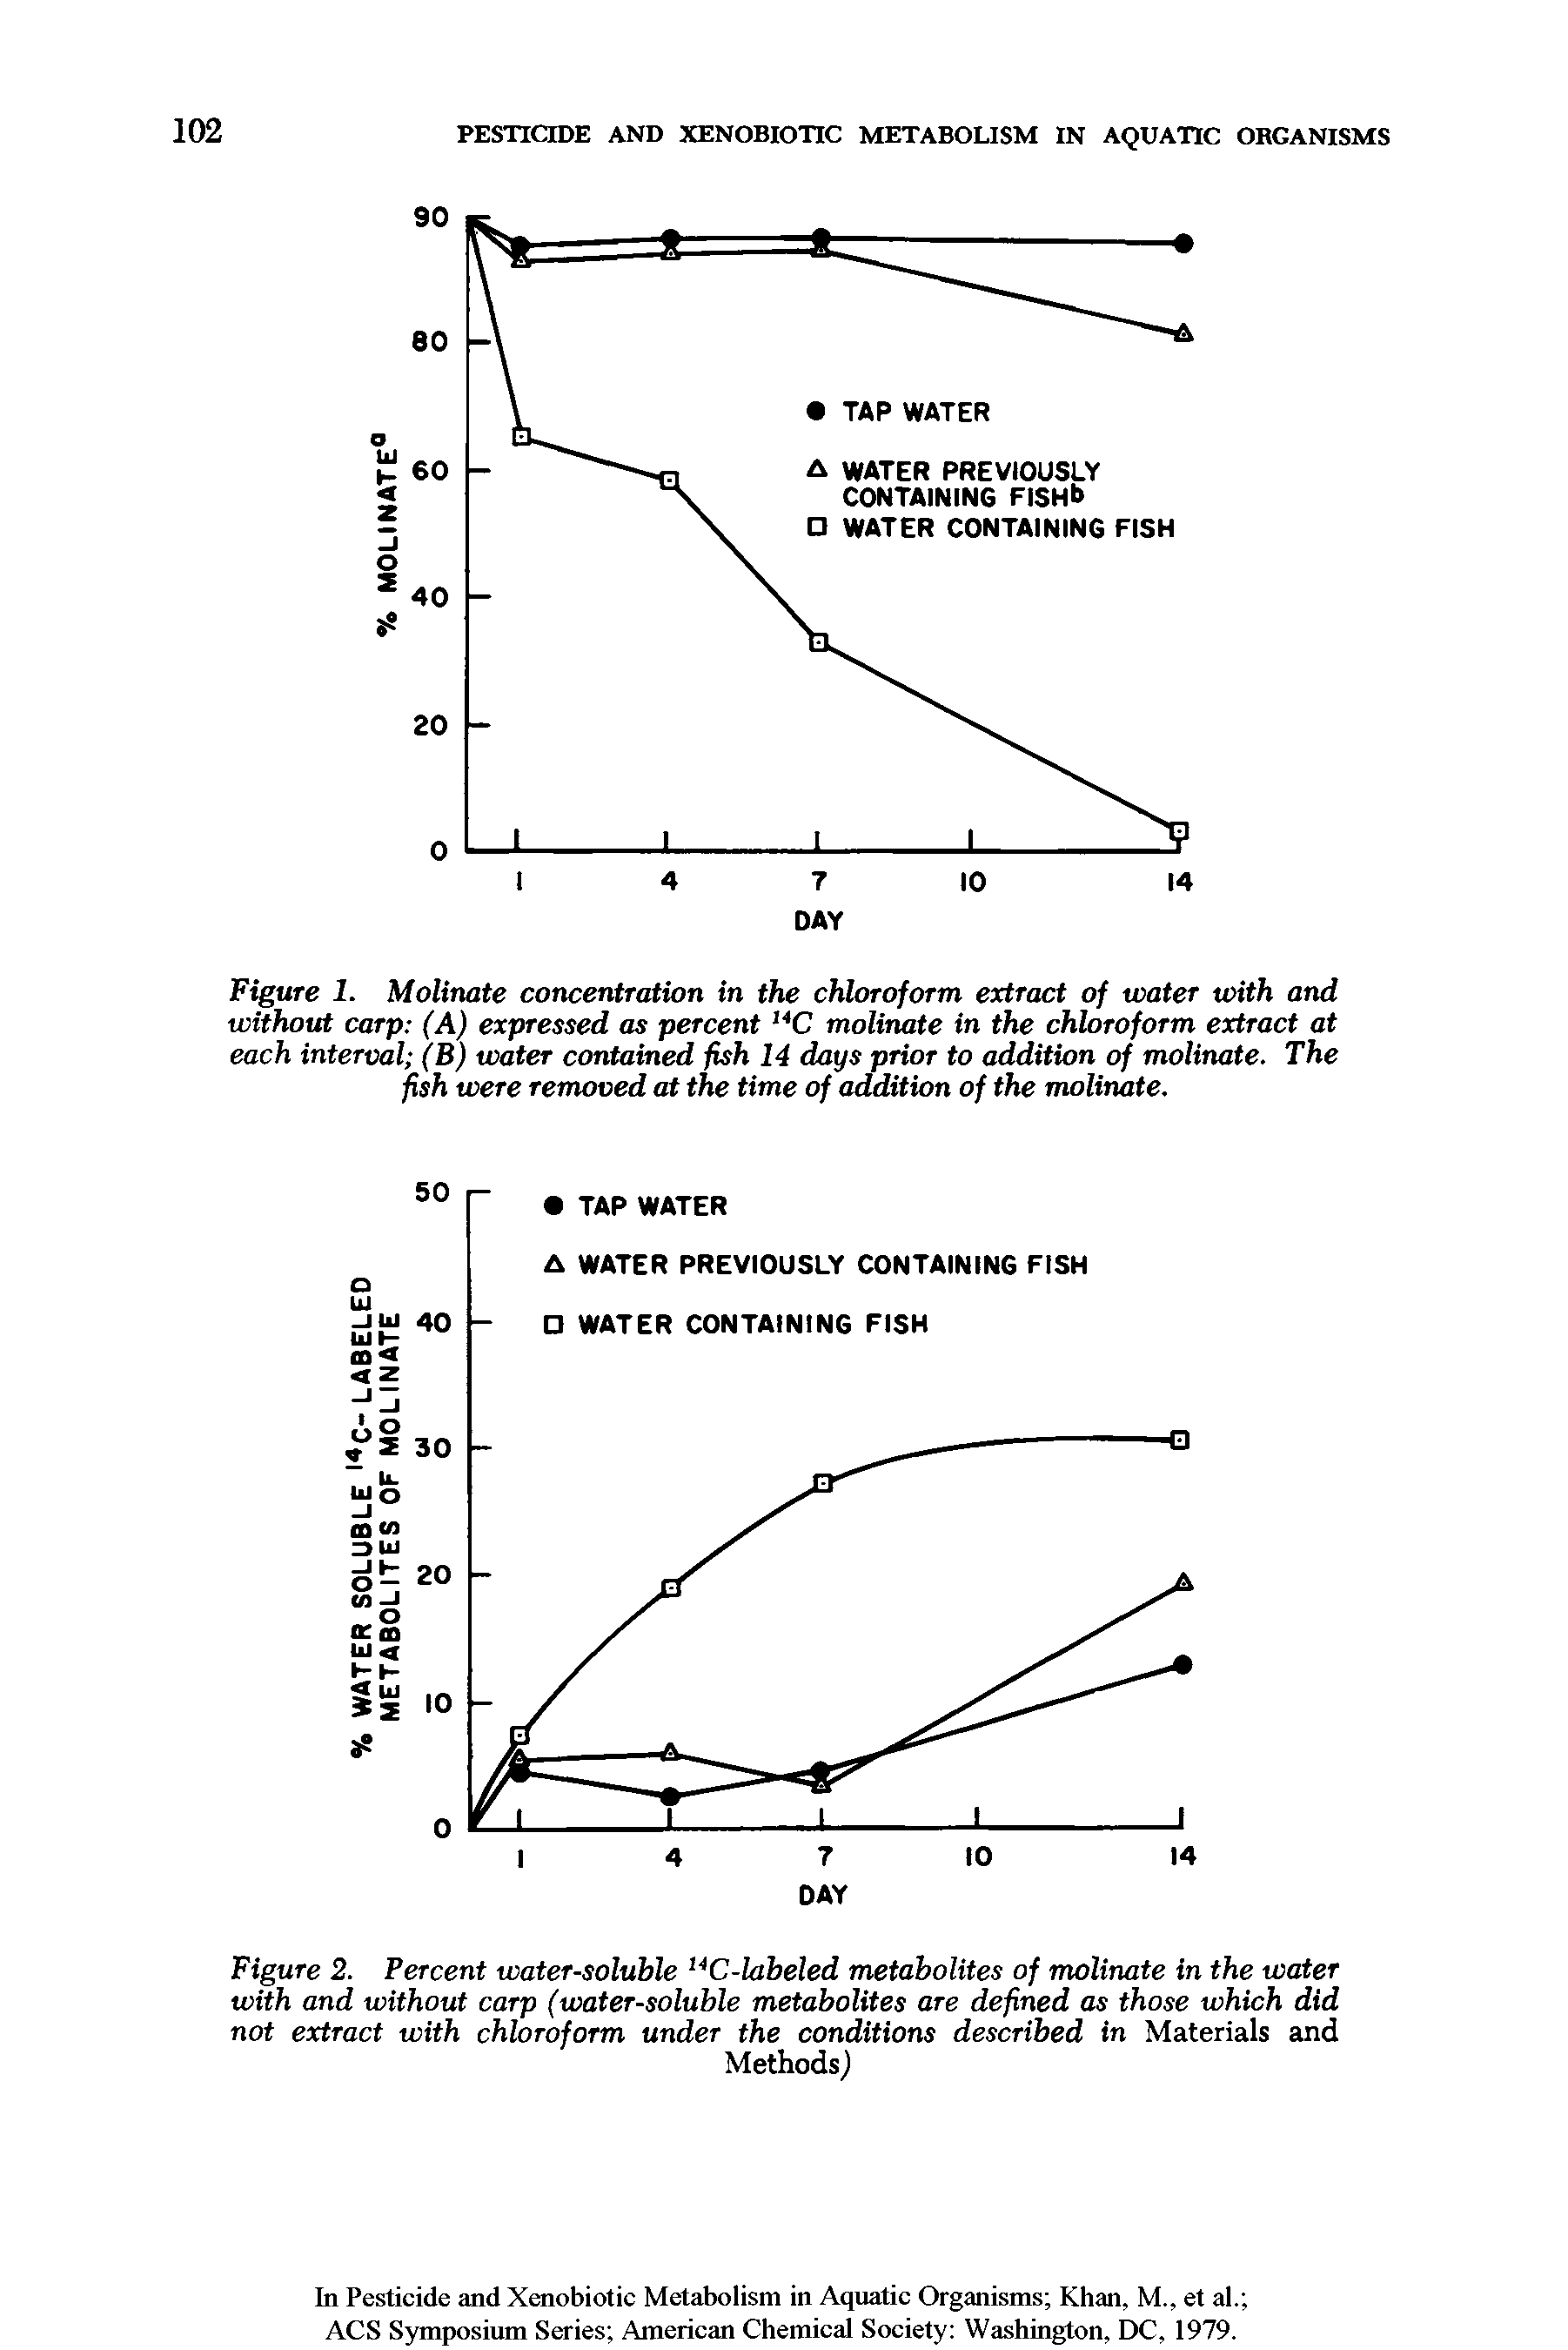 Figure 1. Molinate concentration in the chloroform extract of water with and without carp (A) expressed as percent 14C molinate in the chloroform extract at each interval (B) water contained fish 14 days prior to addition of molinate. The fish were removed at the time of addition of the molinate.